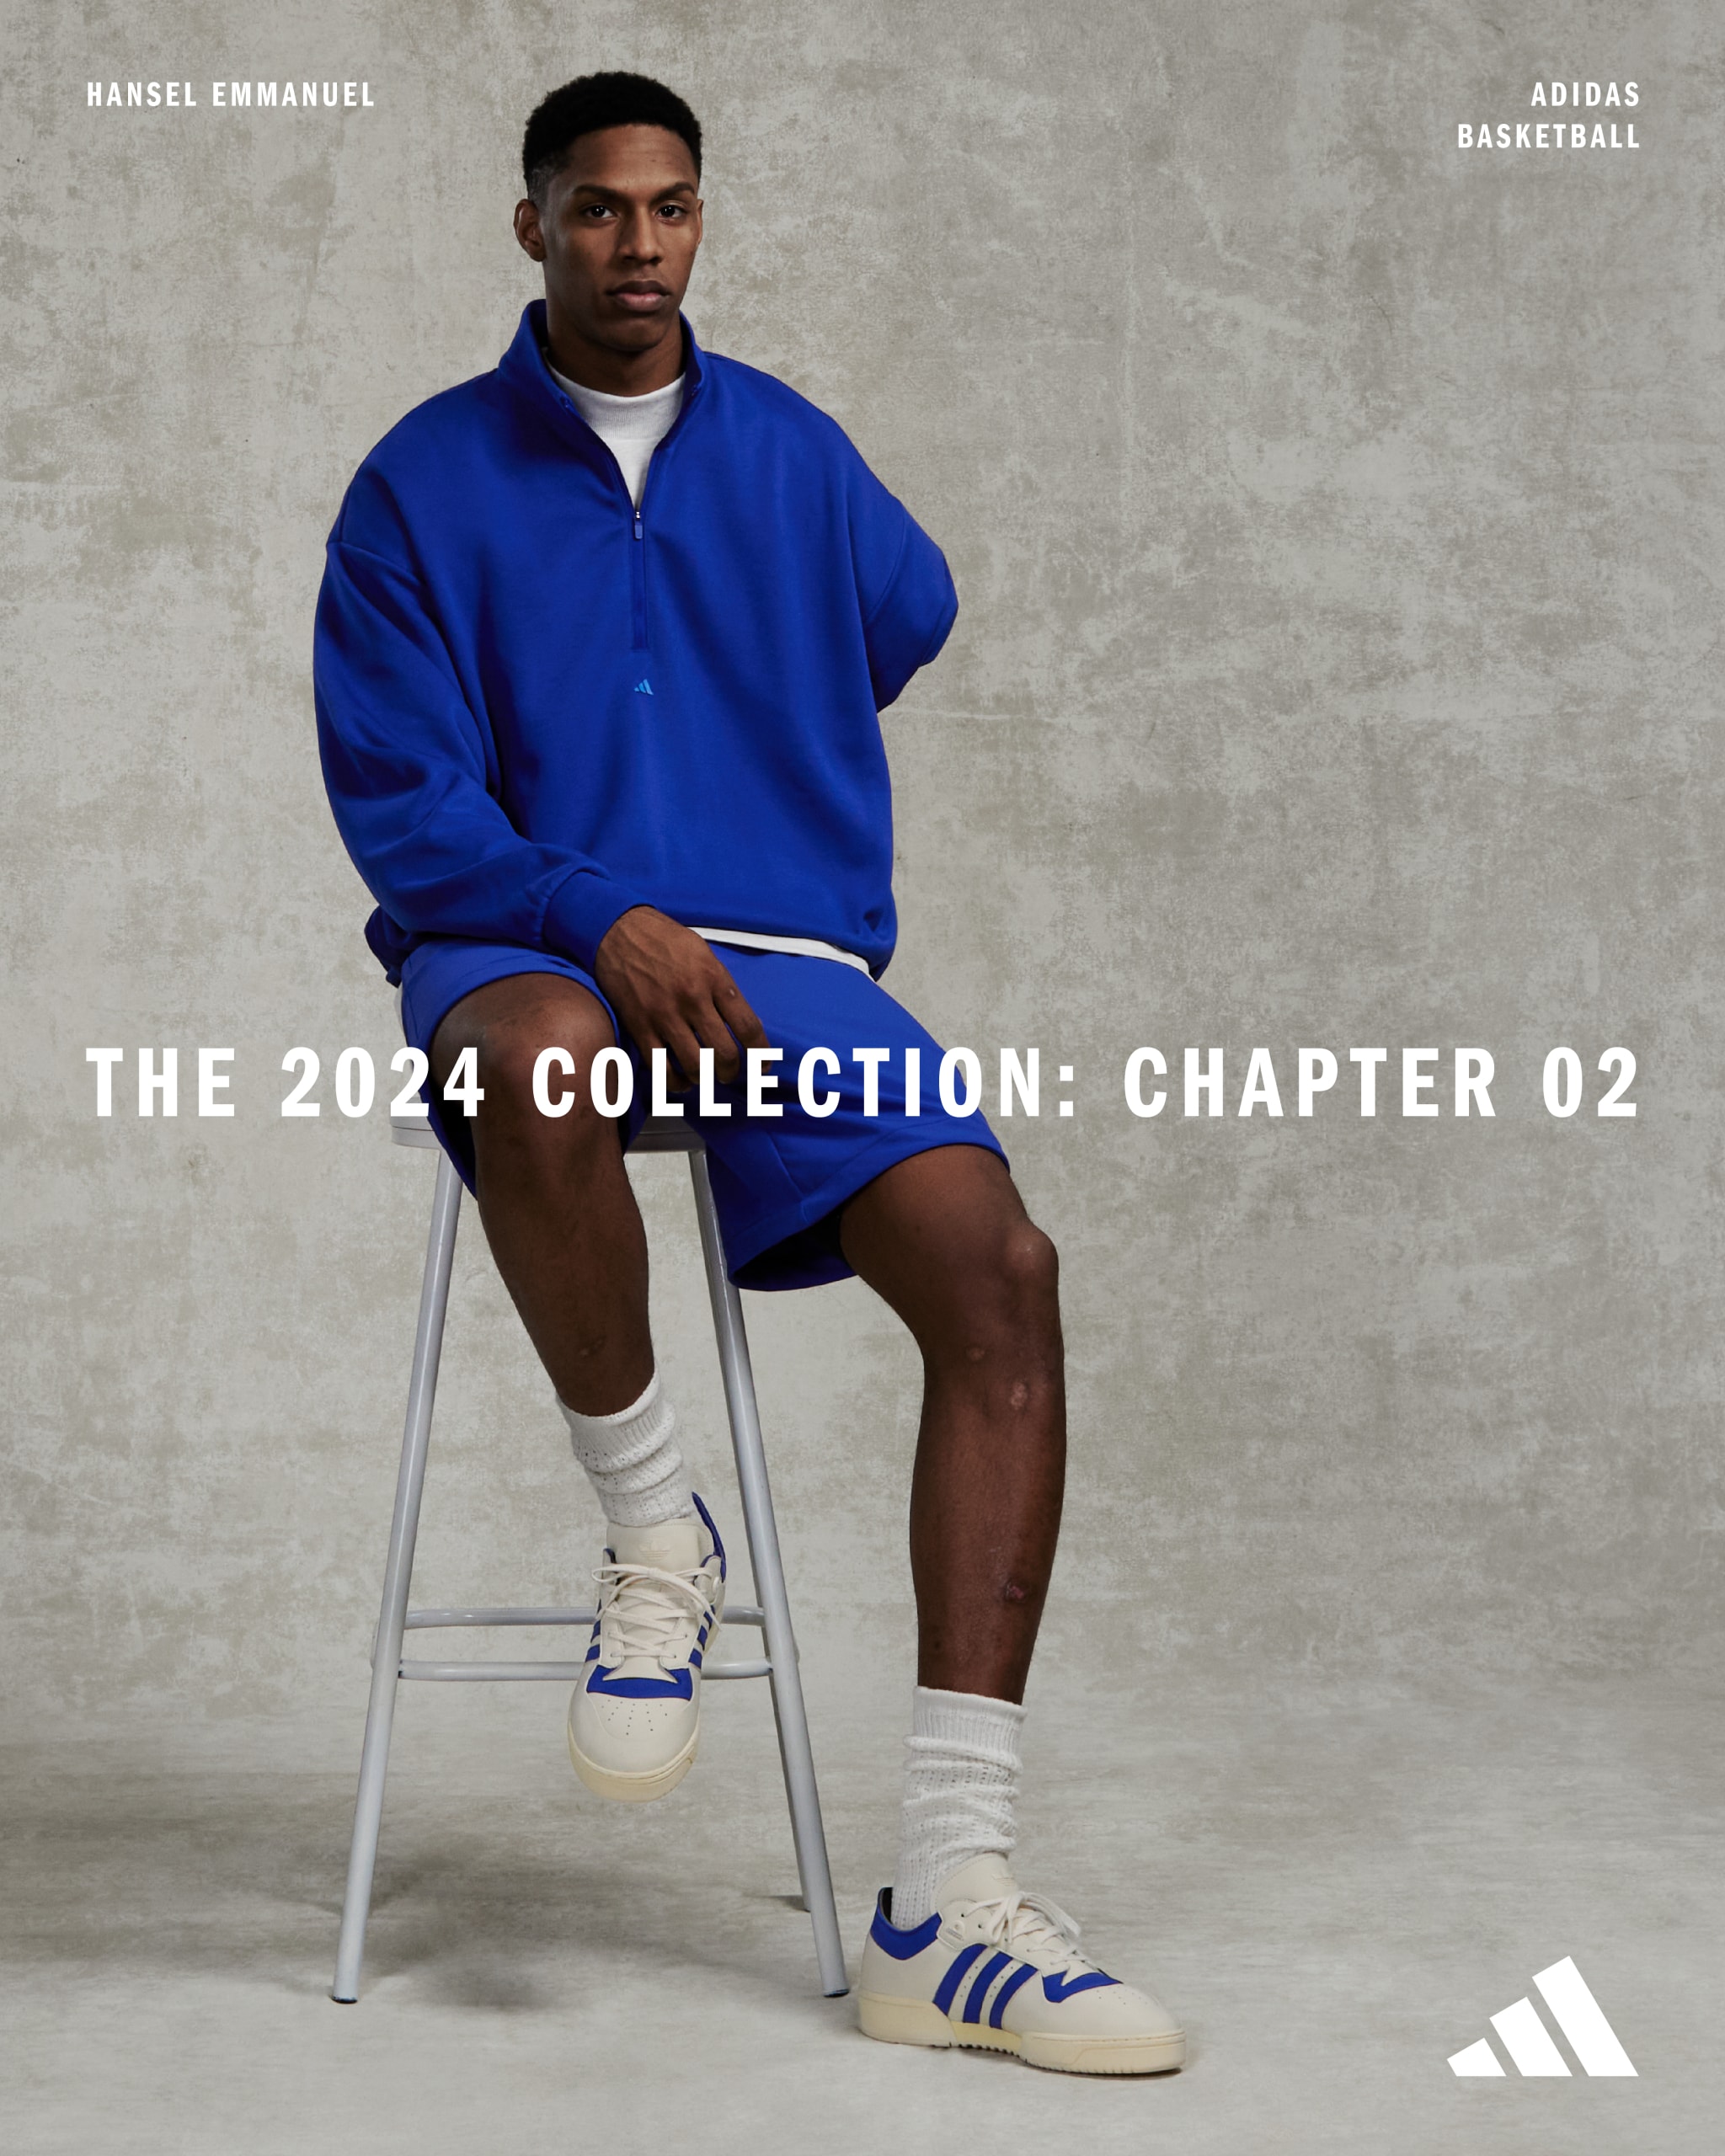 adidas Basketball 发布 THE 2024 COLLECTION: CHAPTER 02 系列